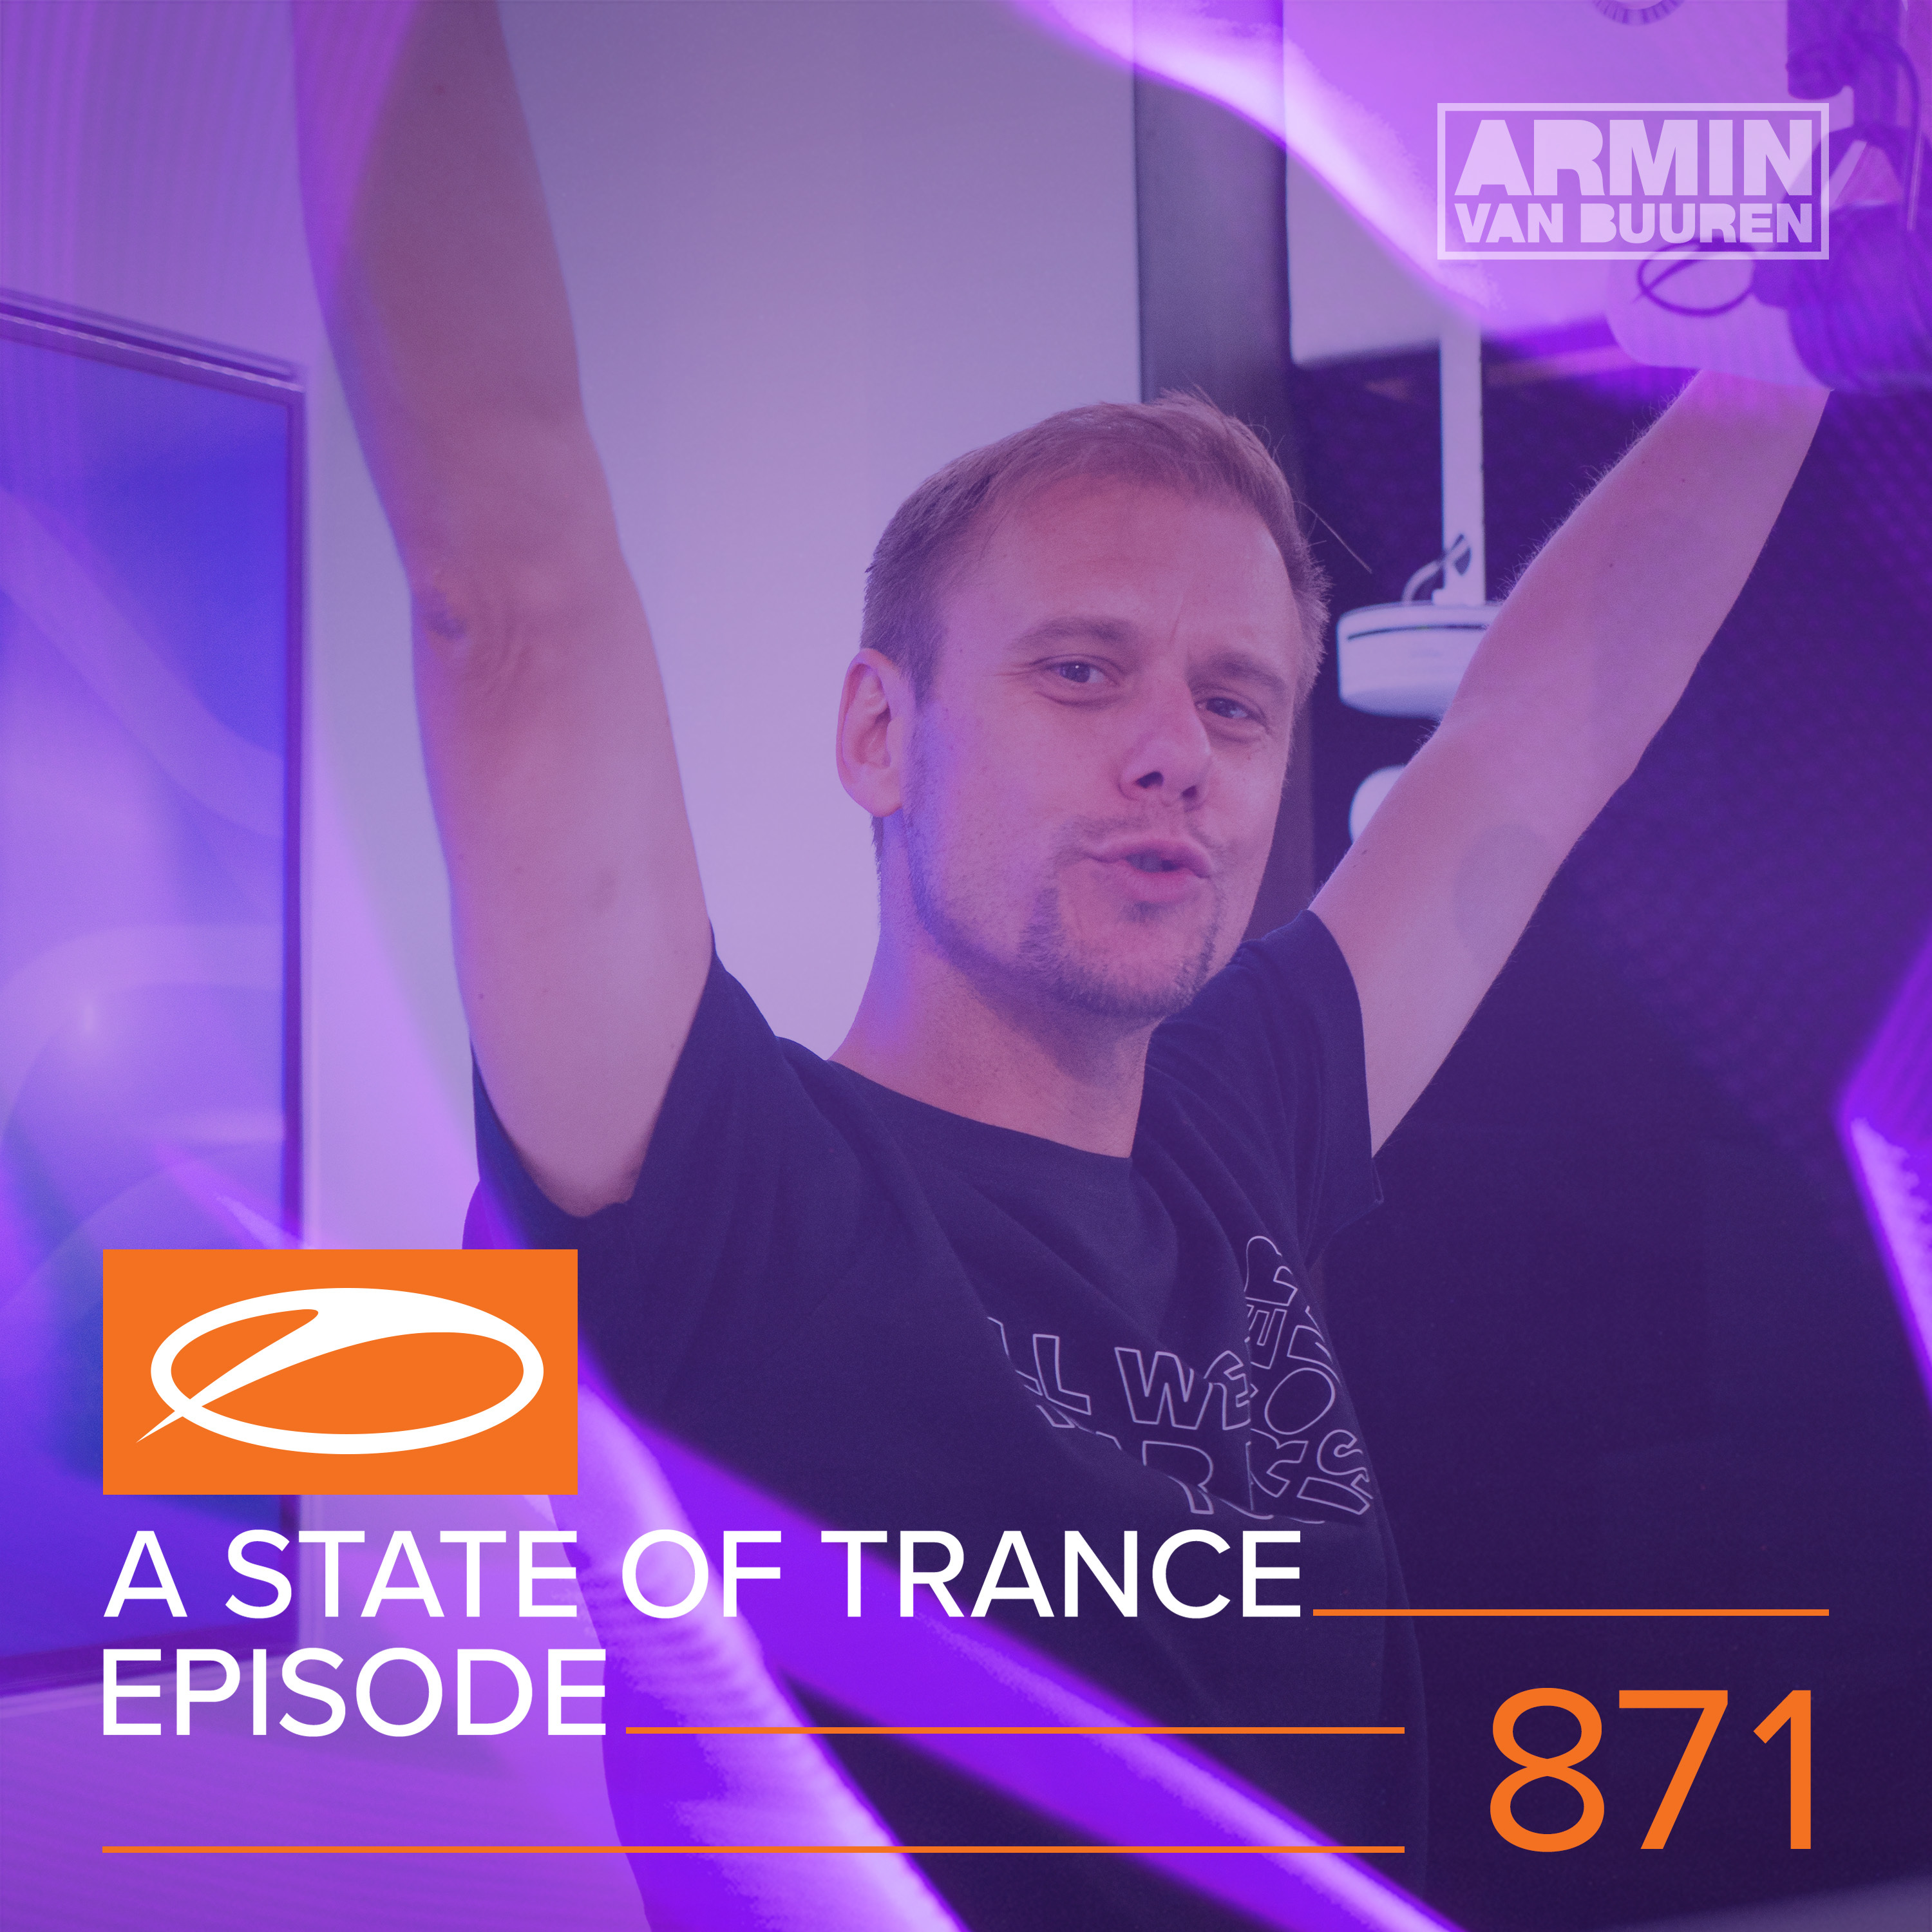 A State Of Trance (ASOT 871) (Coming Up, Pt. 2)